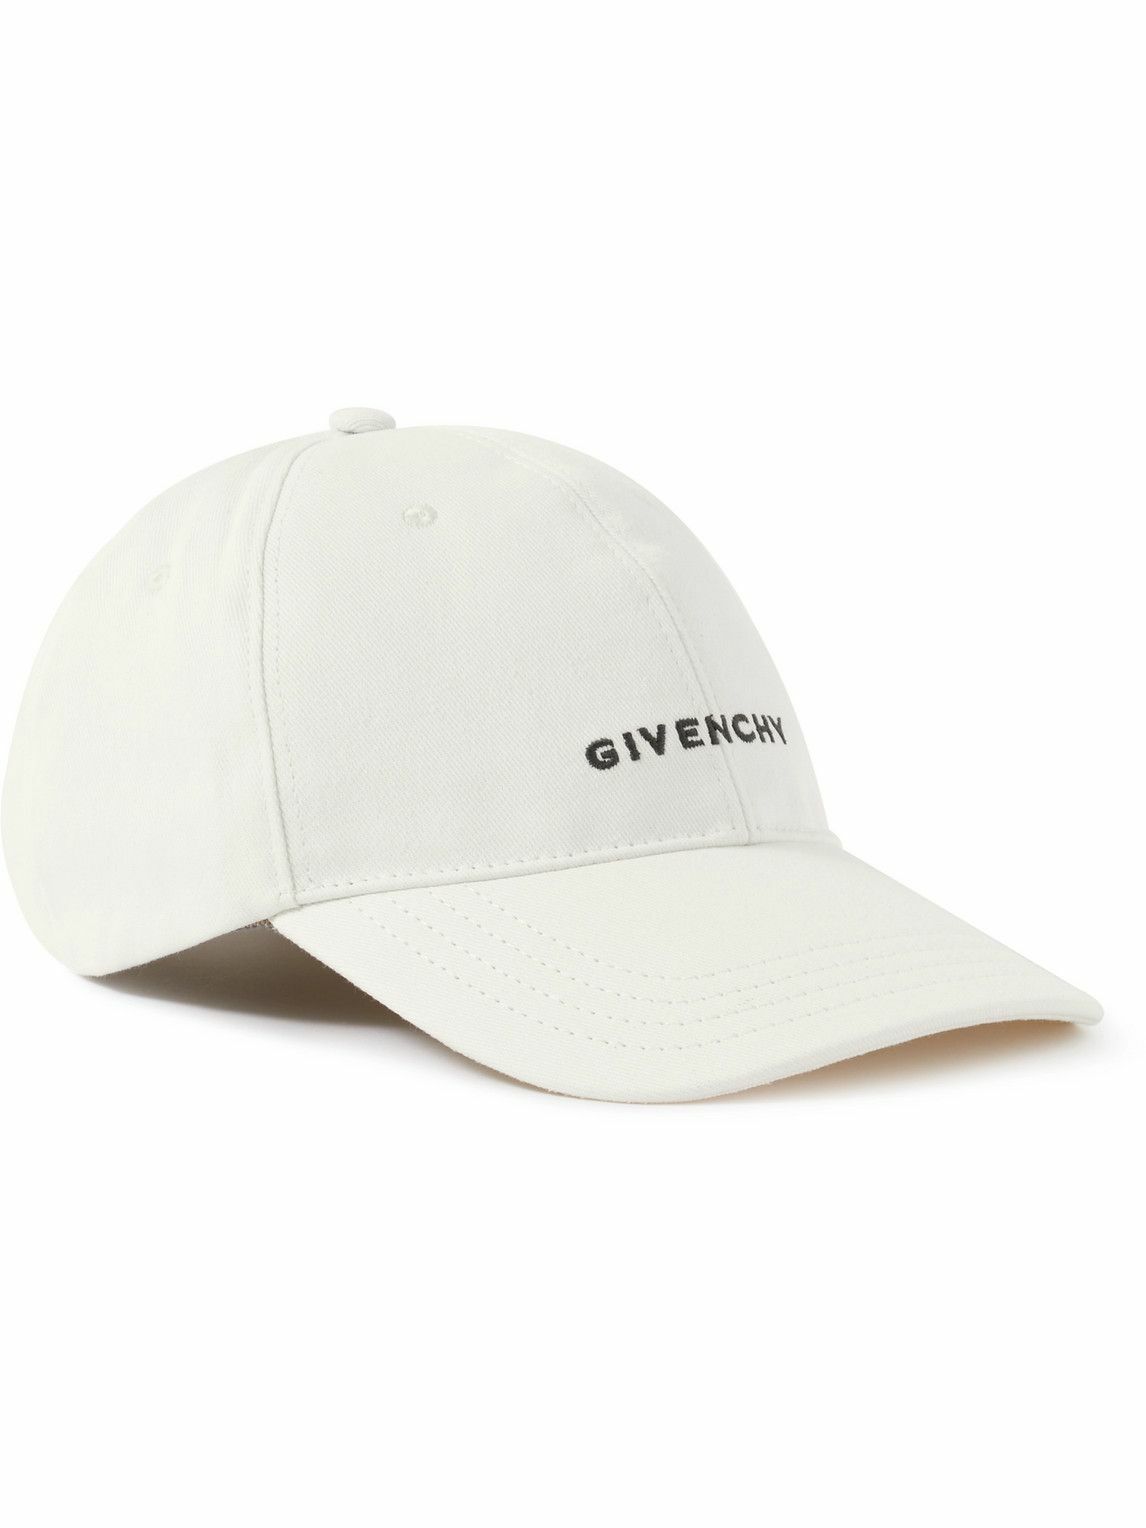 Givenchy - Logo-Embroidered Cotton-Blend Twill Baseball Cap Givenchy